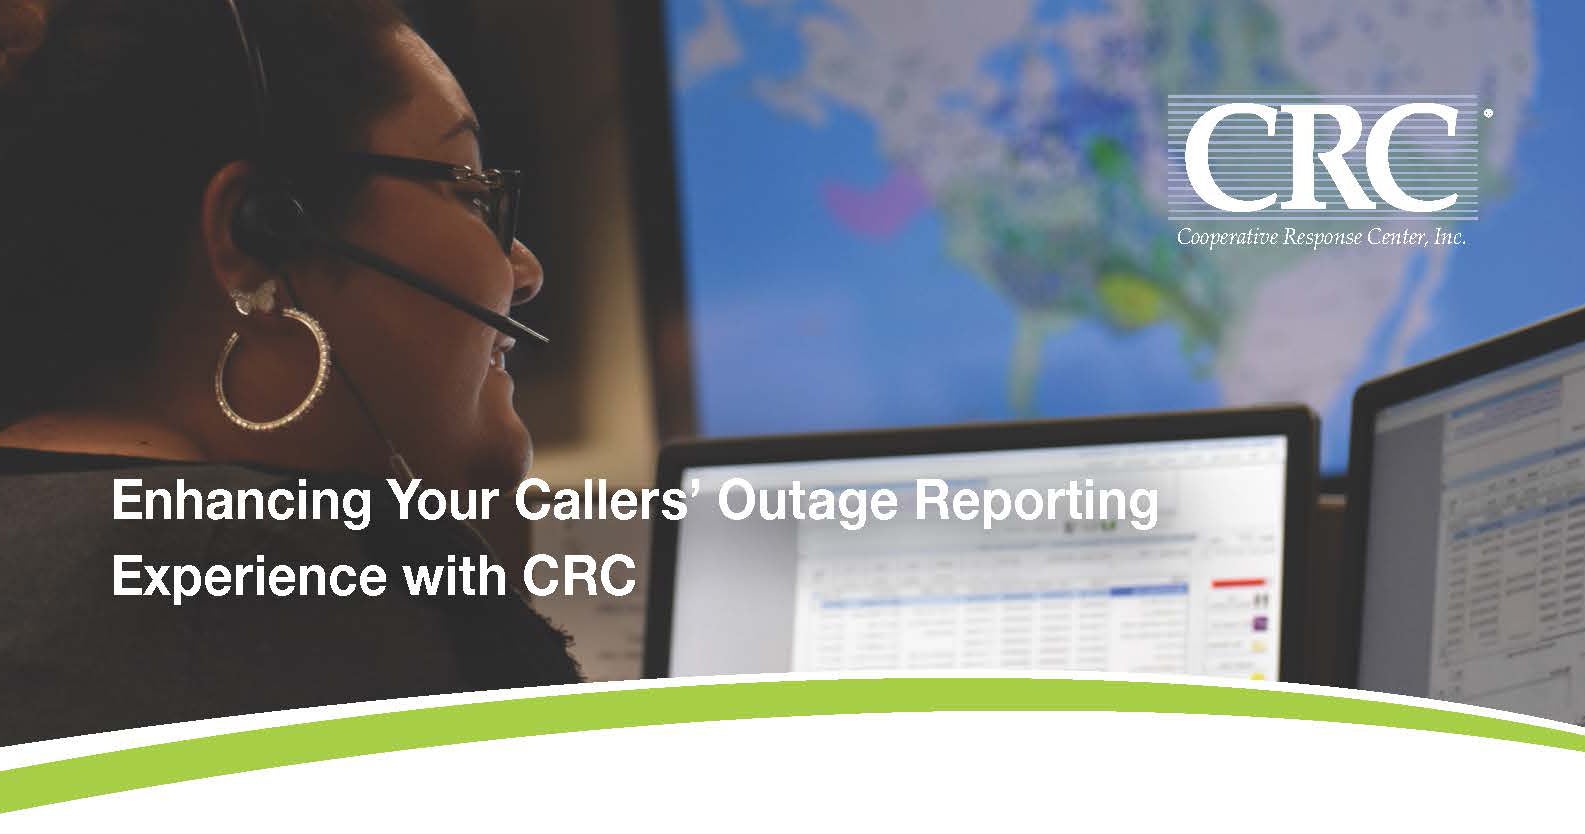 Enhancing Your Callers' Outage Reporting Experience with CRC